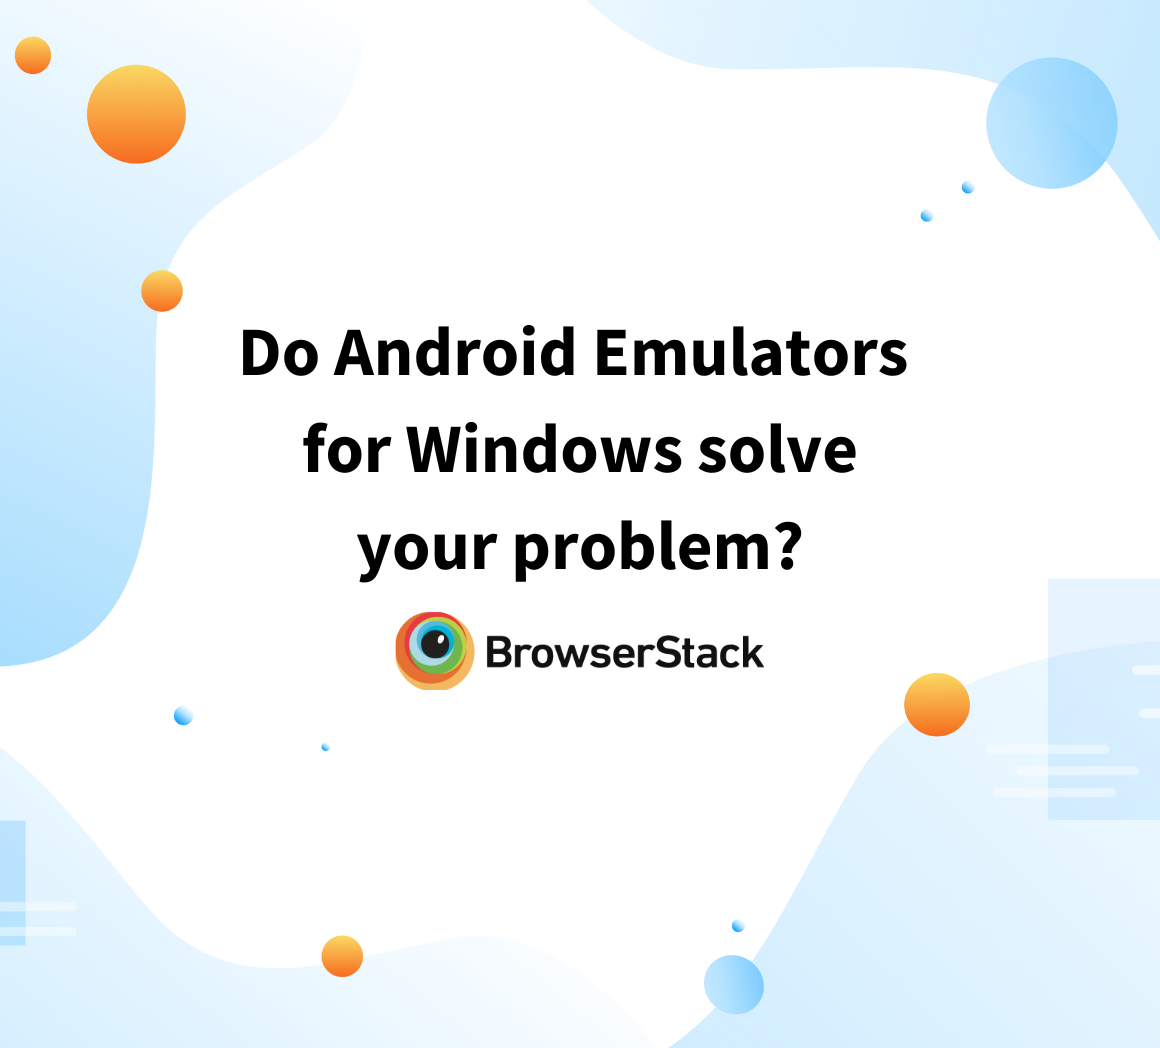 Do Android Emulators for Windows solve your problem